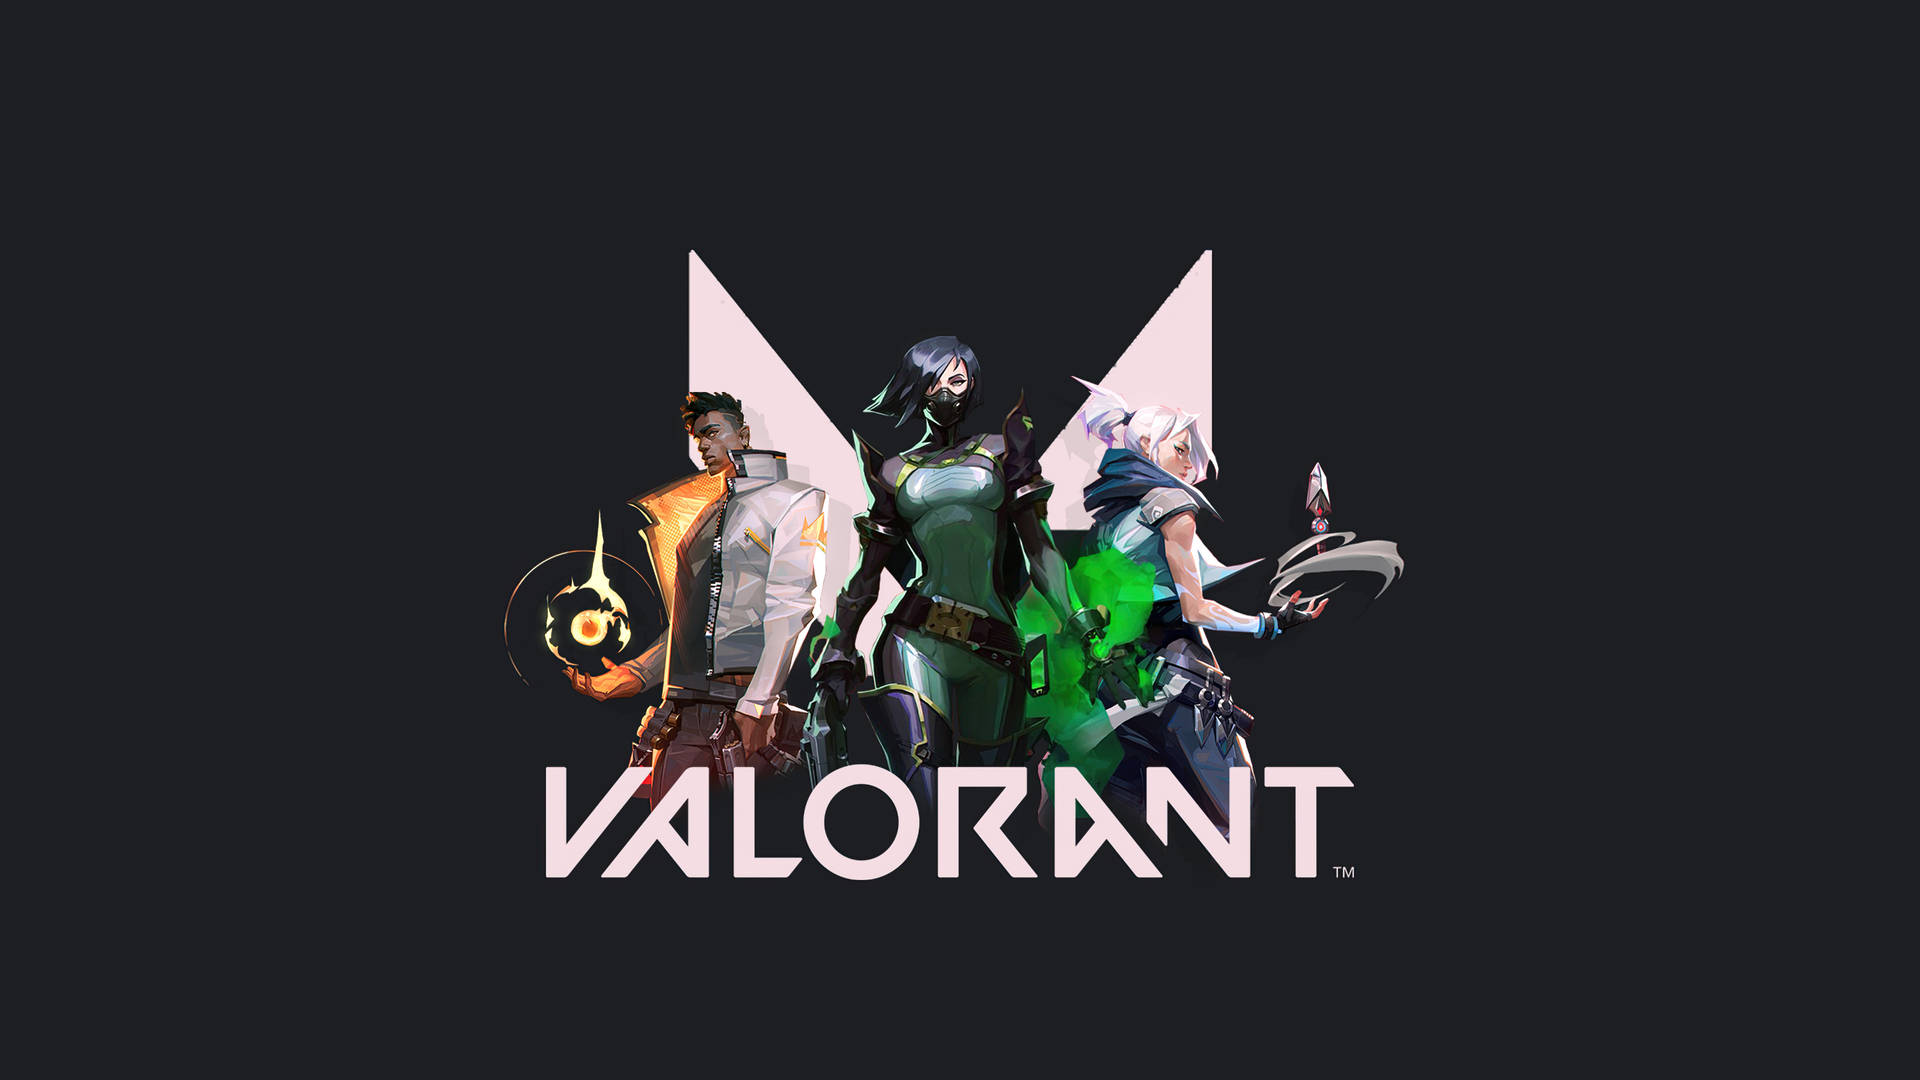 Combining Fire And Poison, Phoenix And Viper Are Powerful Agents In The Valorant Universe.